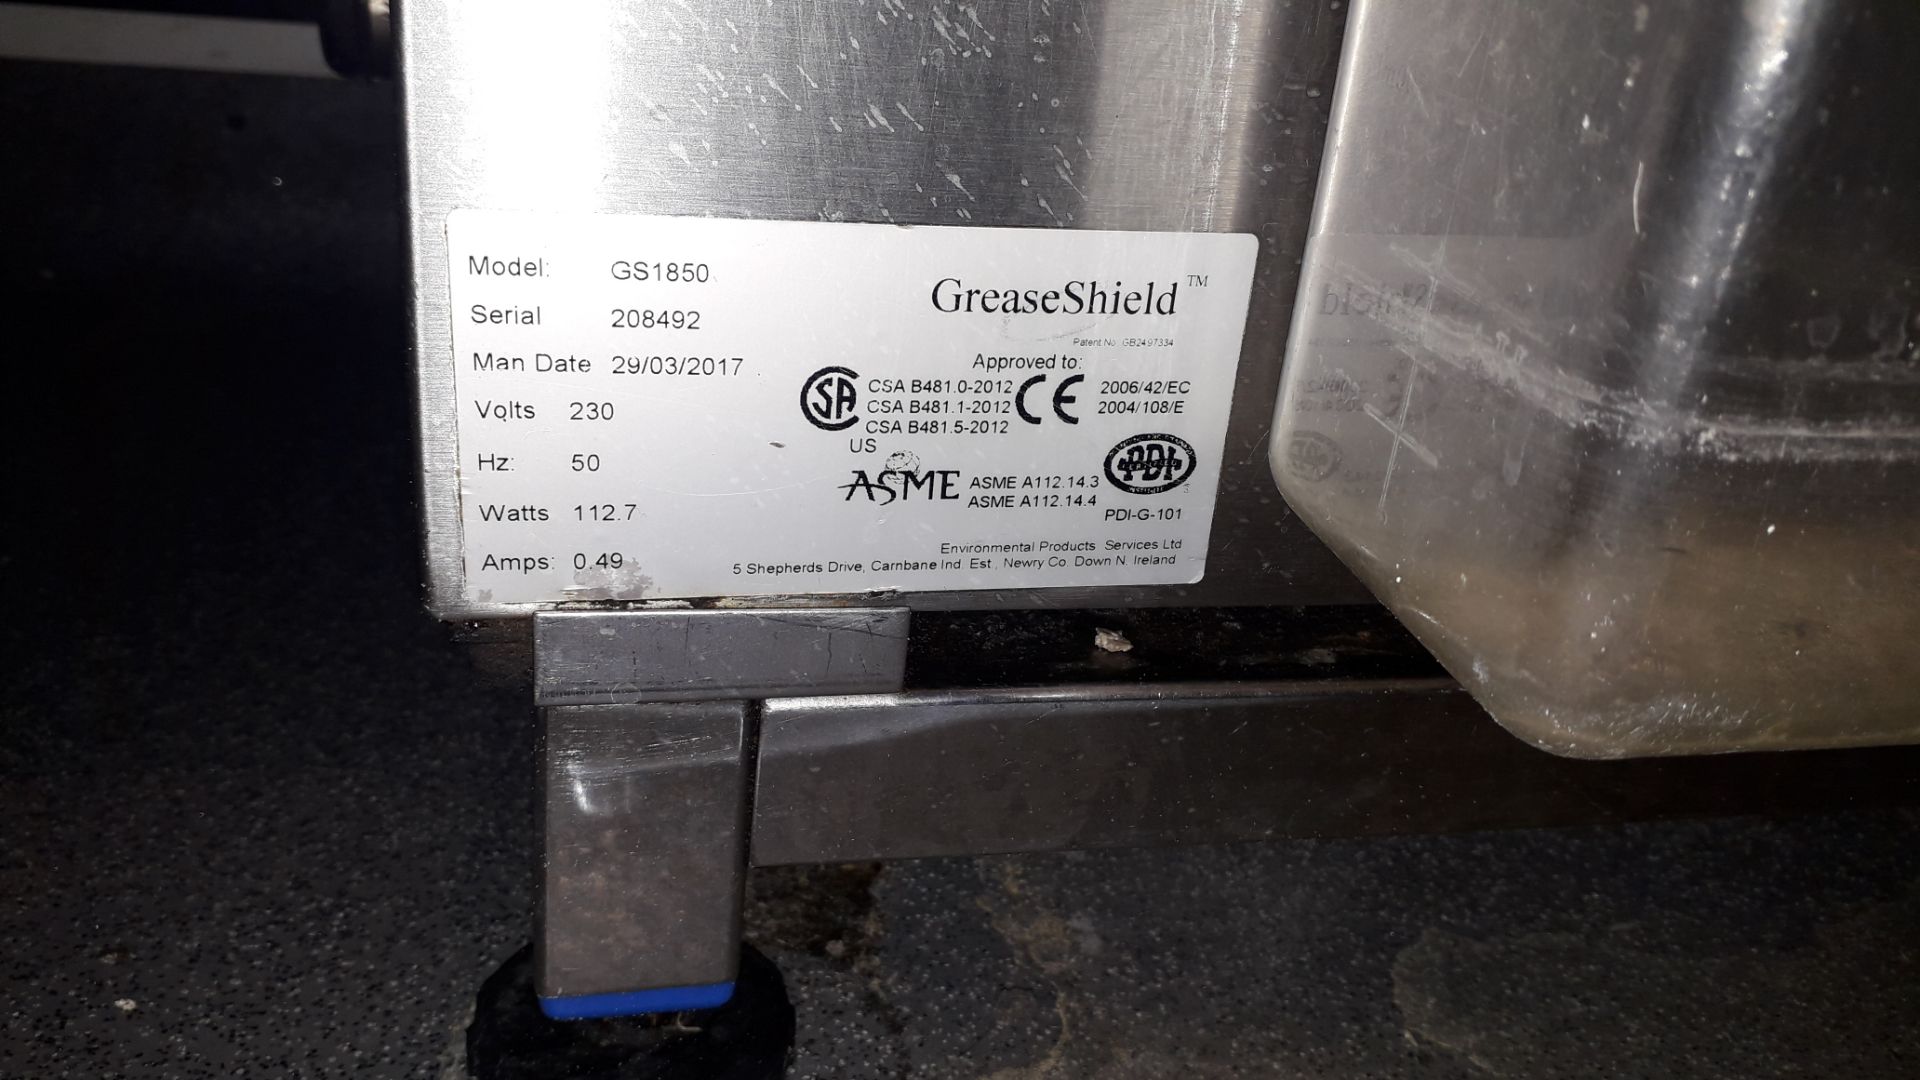 Stainless steel double deep Sink with grease shield GS1850 grease trap, serial number 208492 (2017) - Image 5 of 5